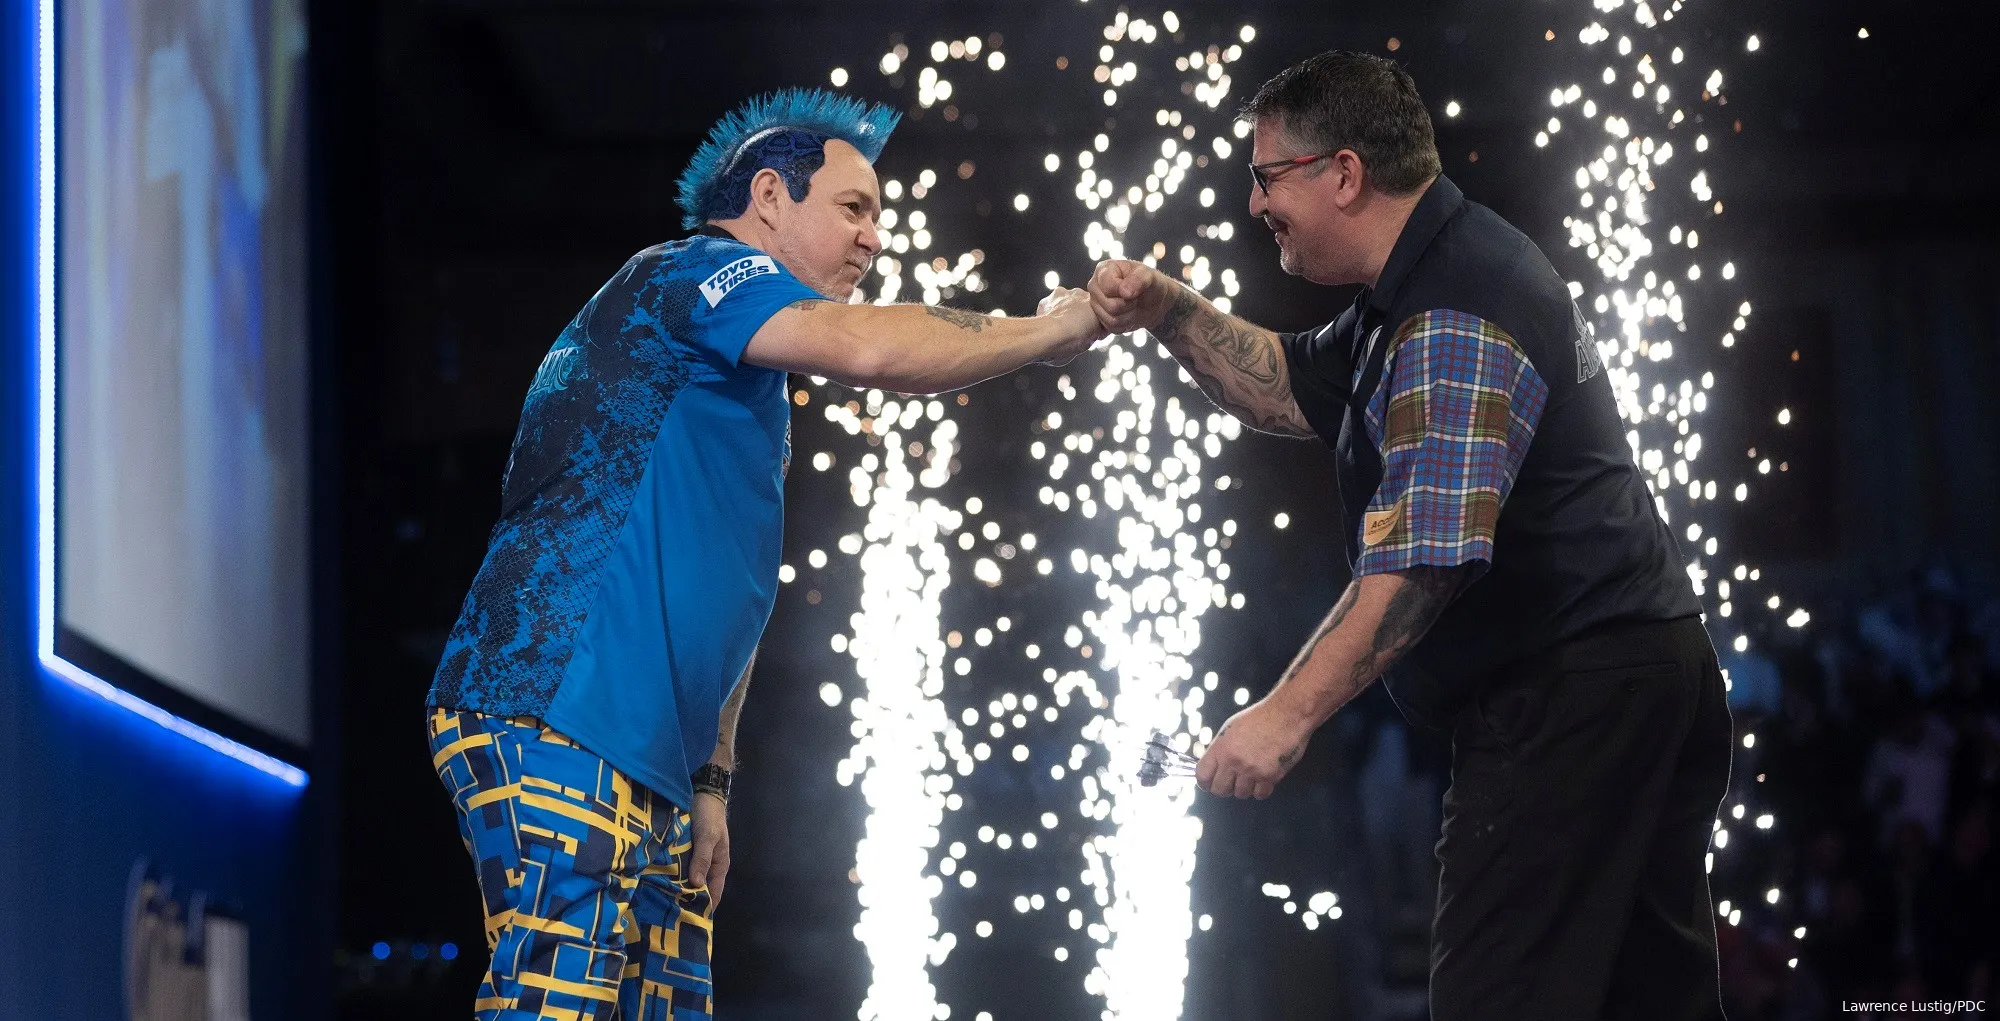 WLDCHAMPS SF PETER WRIGHT GARY ANDERSON20A